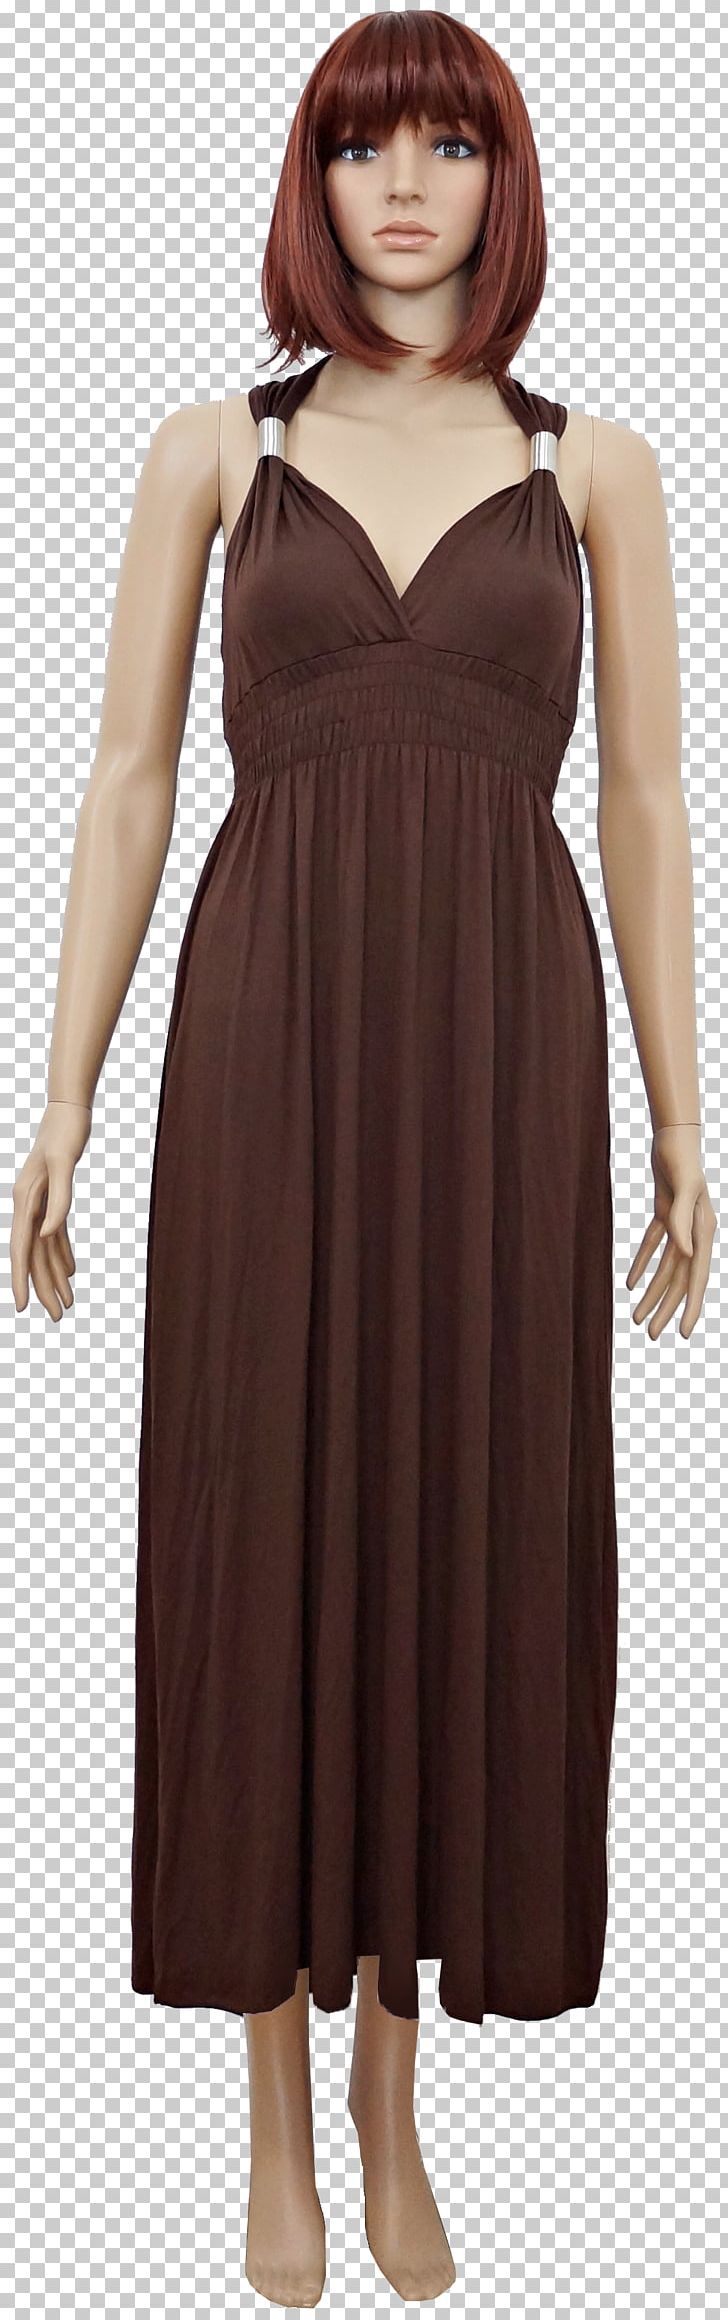 Neck Costume Dress PNG, Clipart, Brown, Clothing, Costume, Day Dress, Dress Free PNG Download